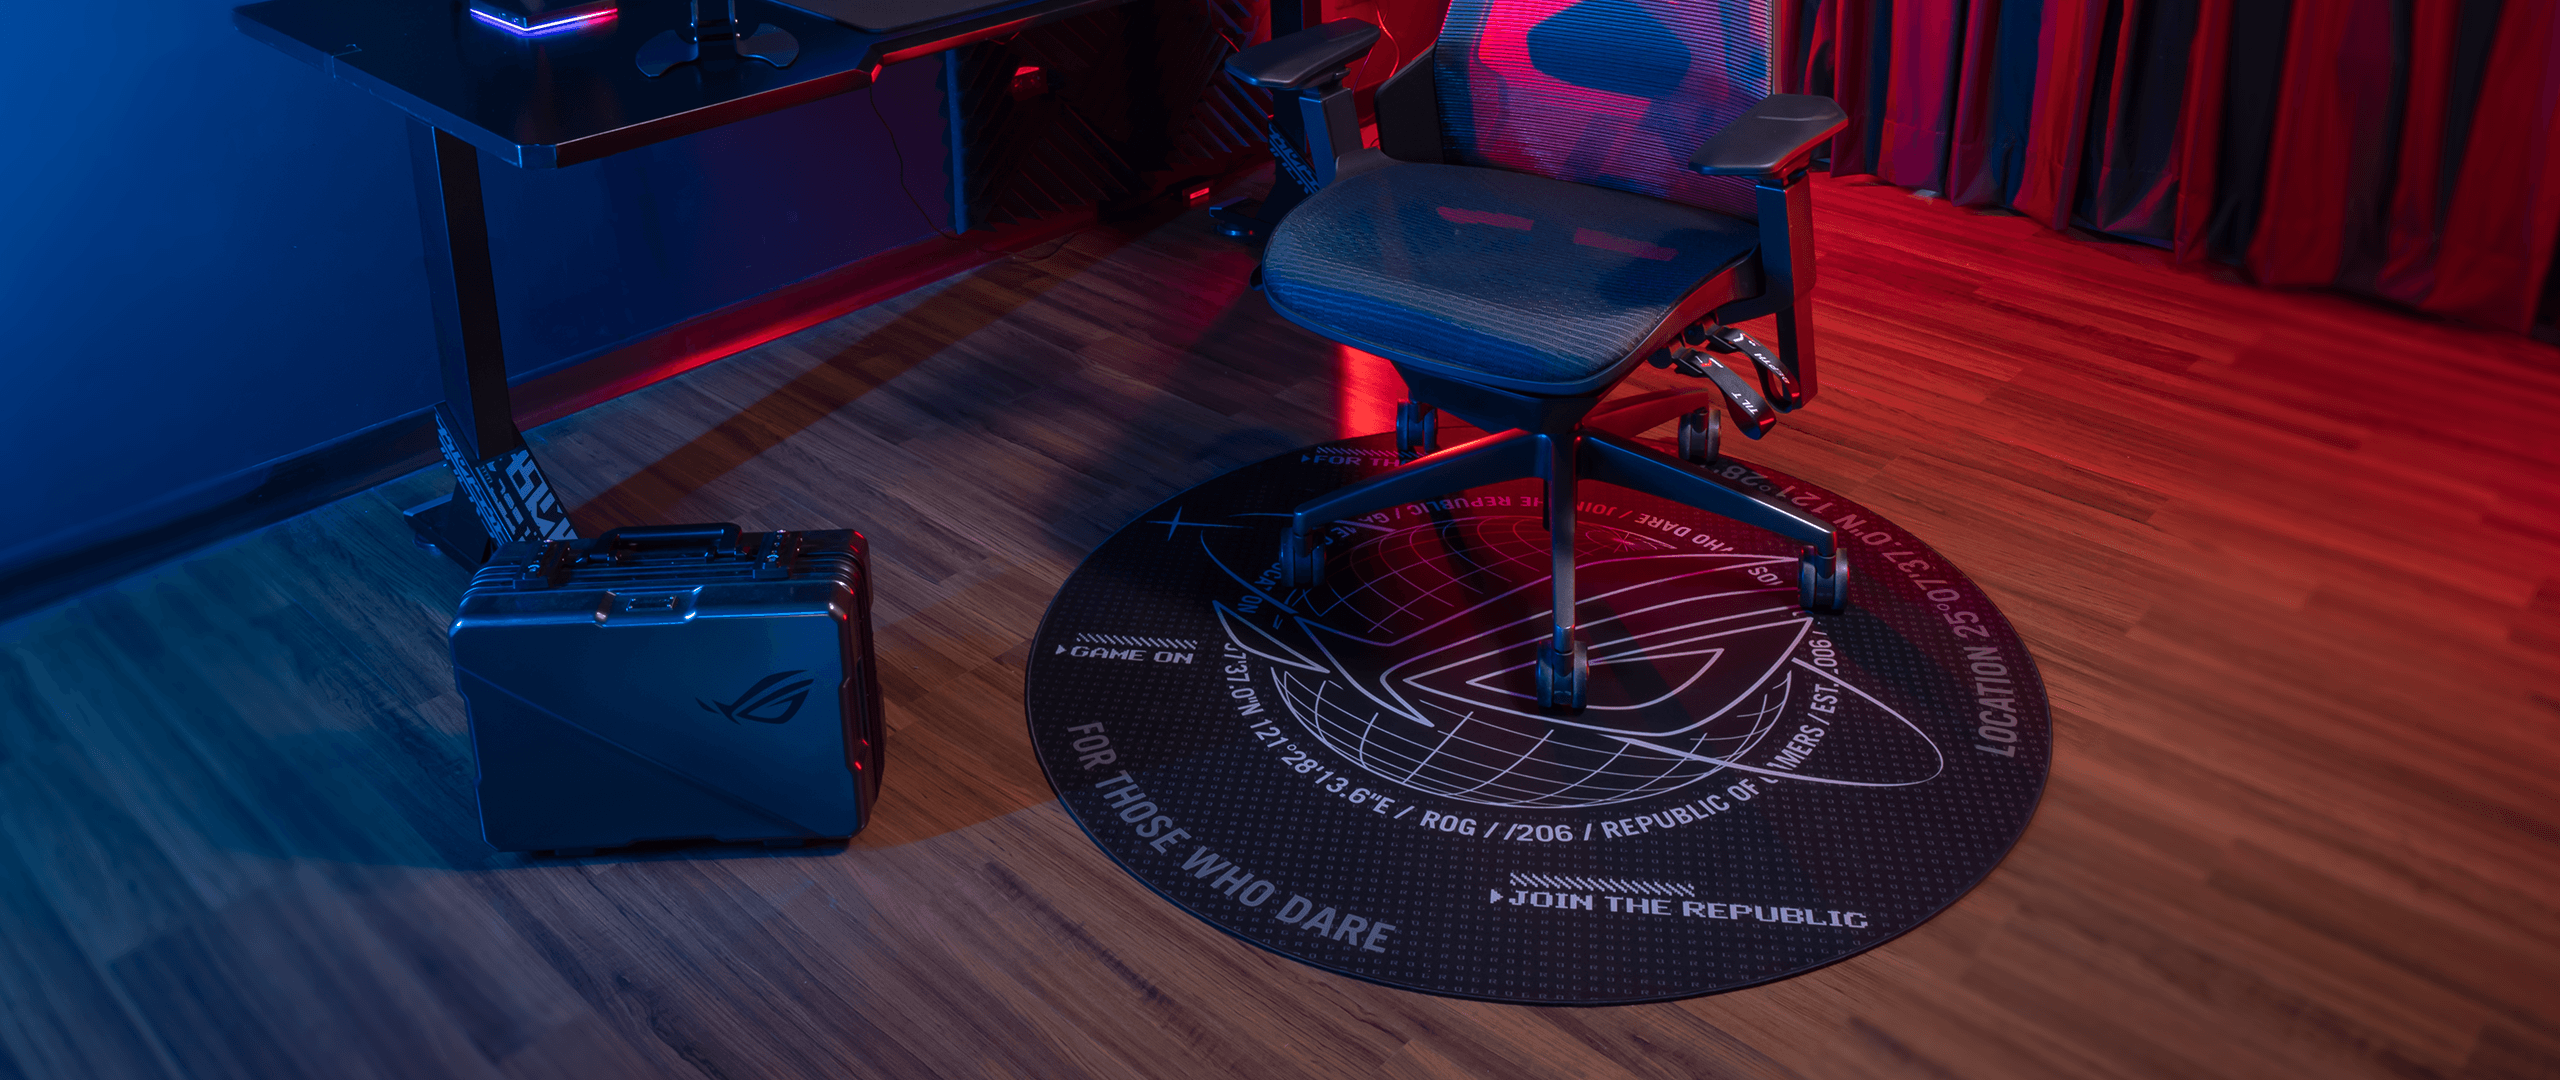 The ROG Cosmic Mat is placed on the floor under the ROG Destrier Ergo Gaming Chair